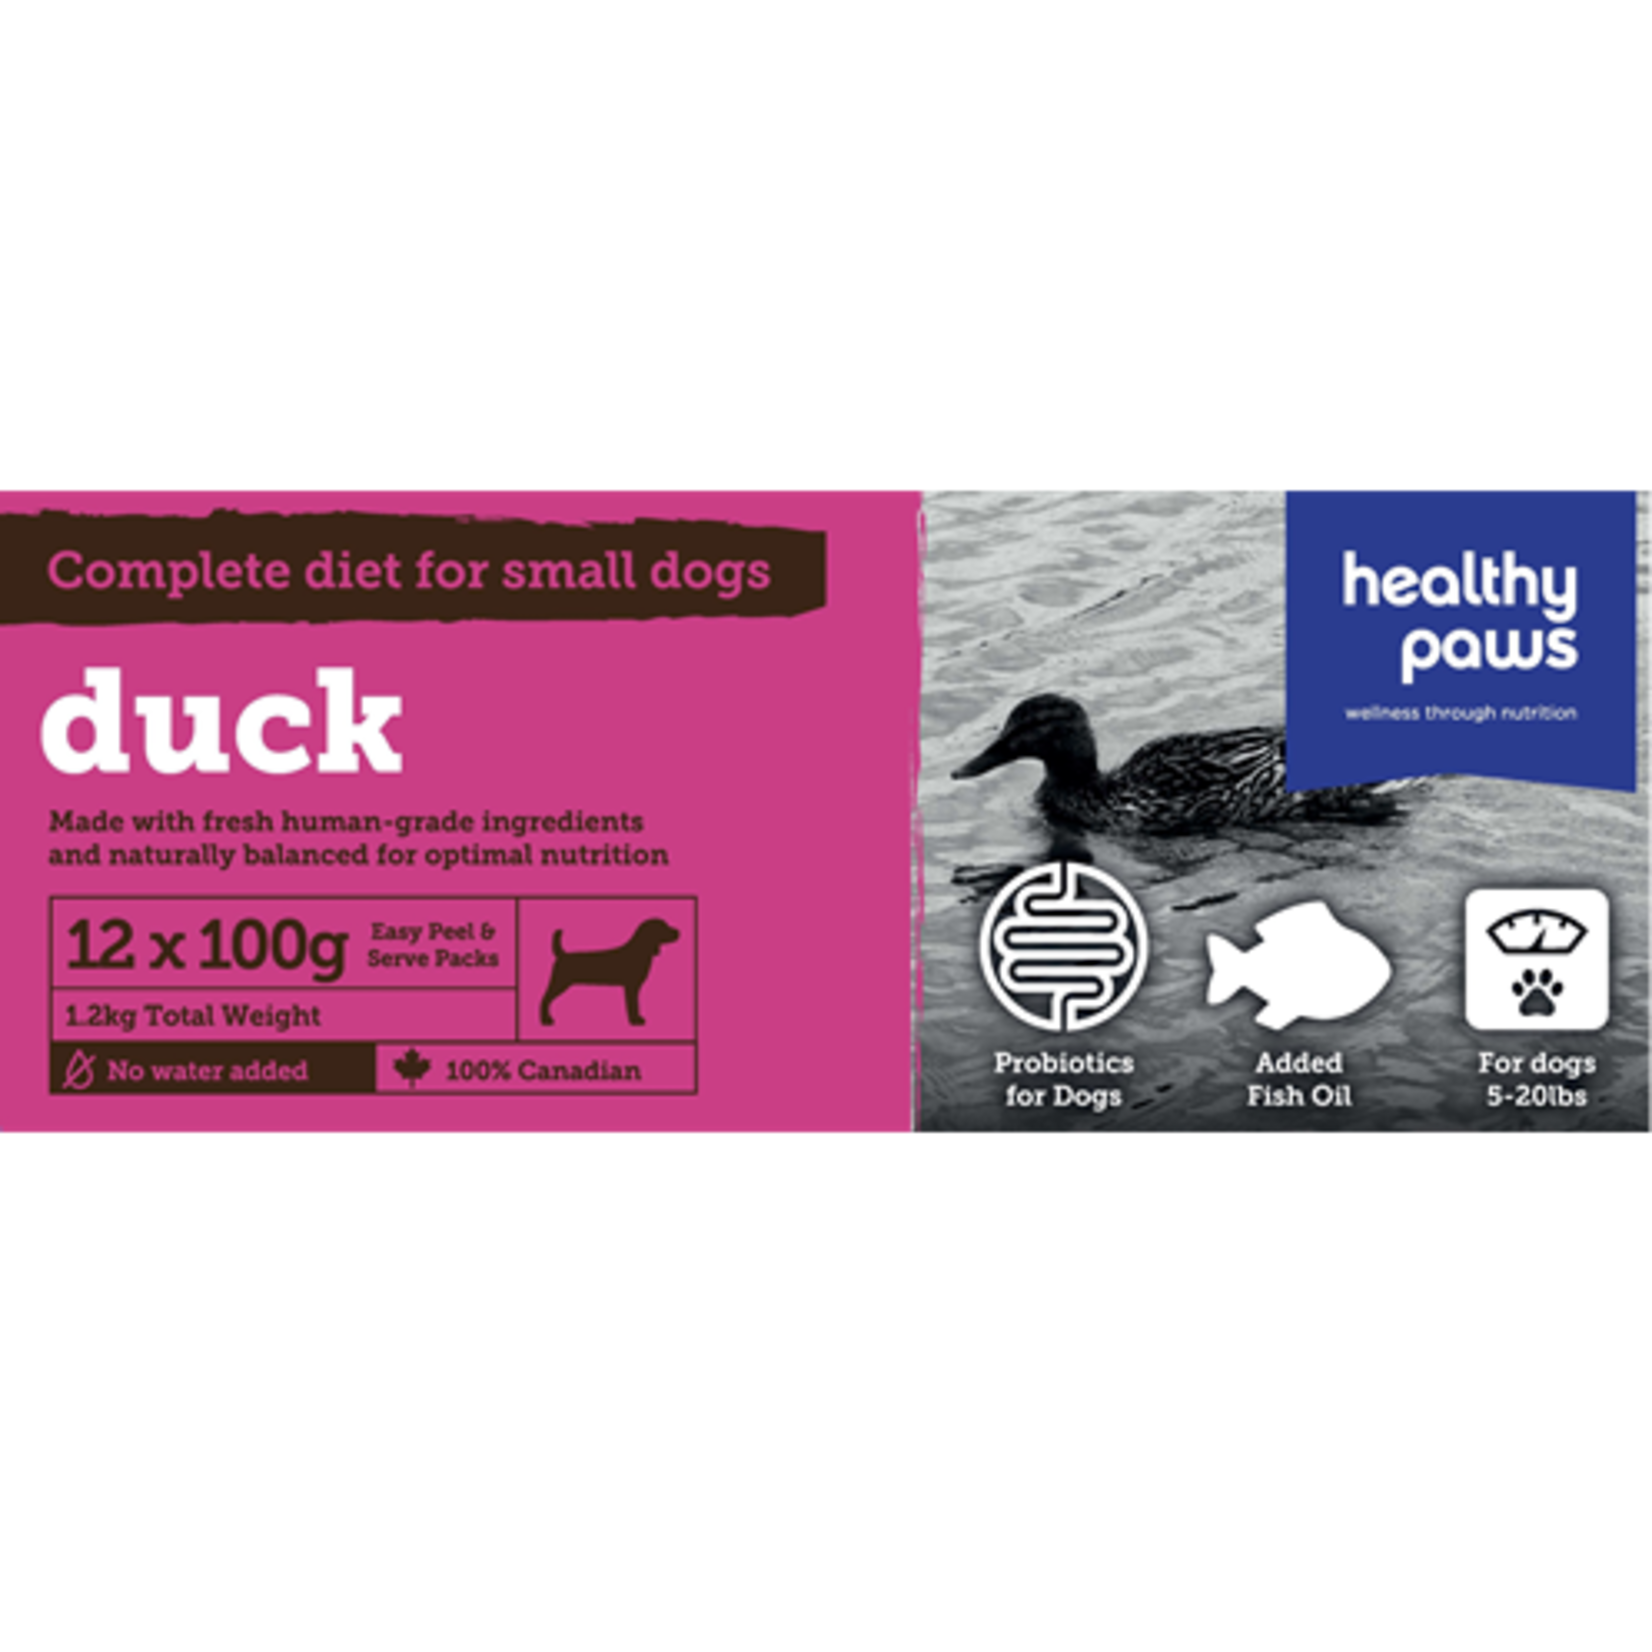 HEALTY PAWS Healthy Paws Complete Small Dog Dinner Duck 12 x 100g